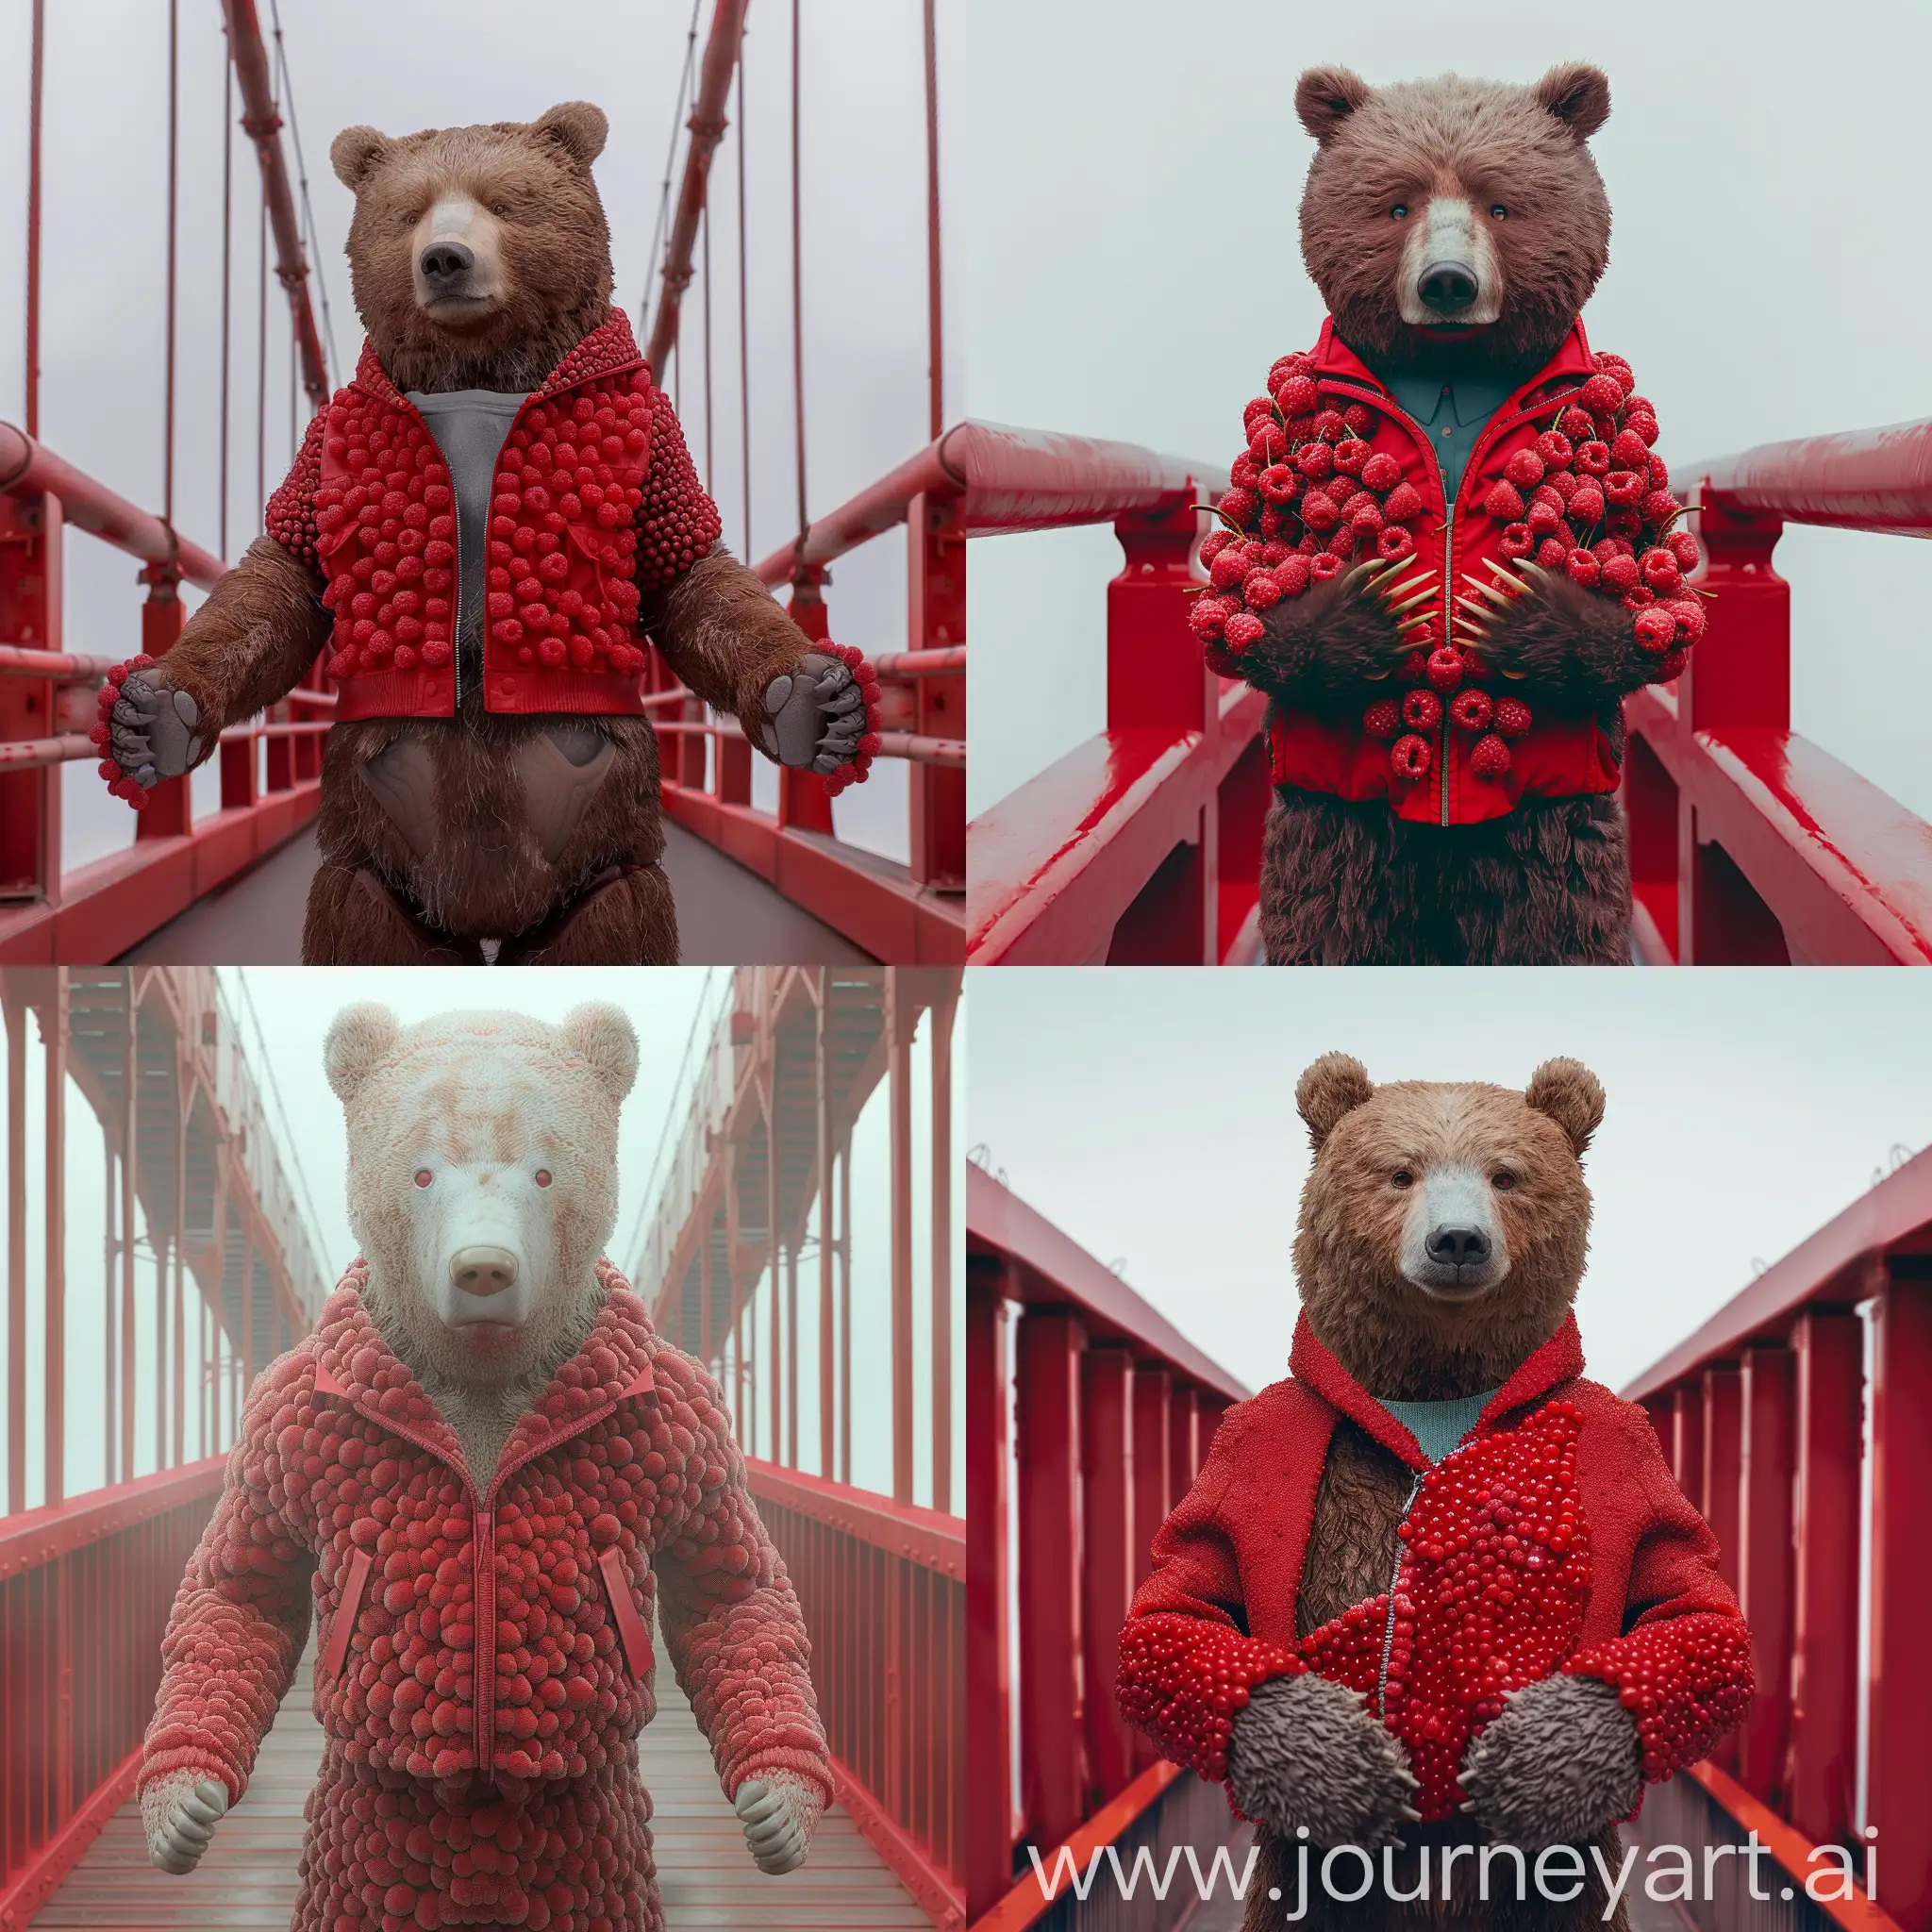 NoFace-from-Spirited-Away-on-Red-Bridge-Realistic-Bear-in-Raspberry-Bomber-Jacket